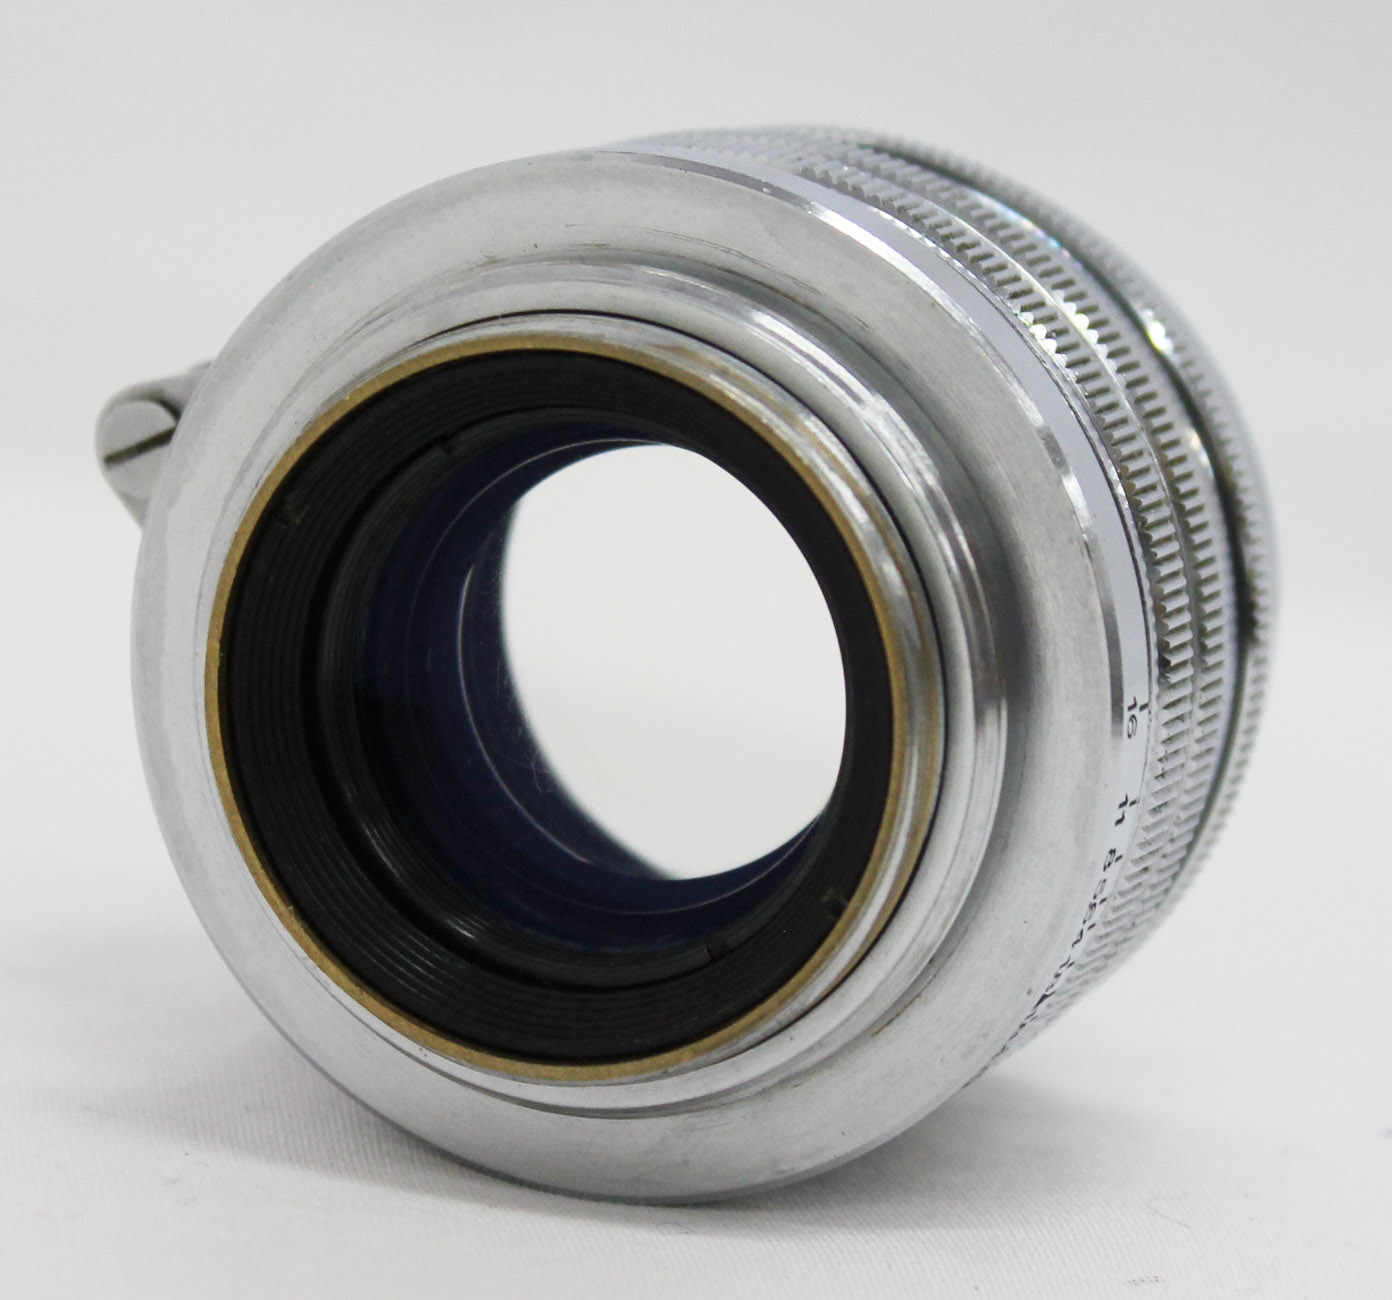  Canon 50mm F/1.8 Lens L39 LTM Leica Screw Mount Silver from Japan  Photo 1